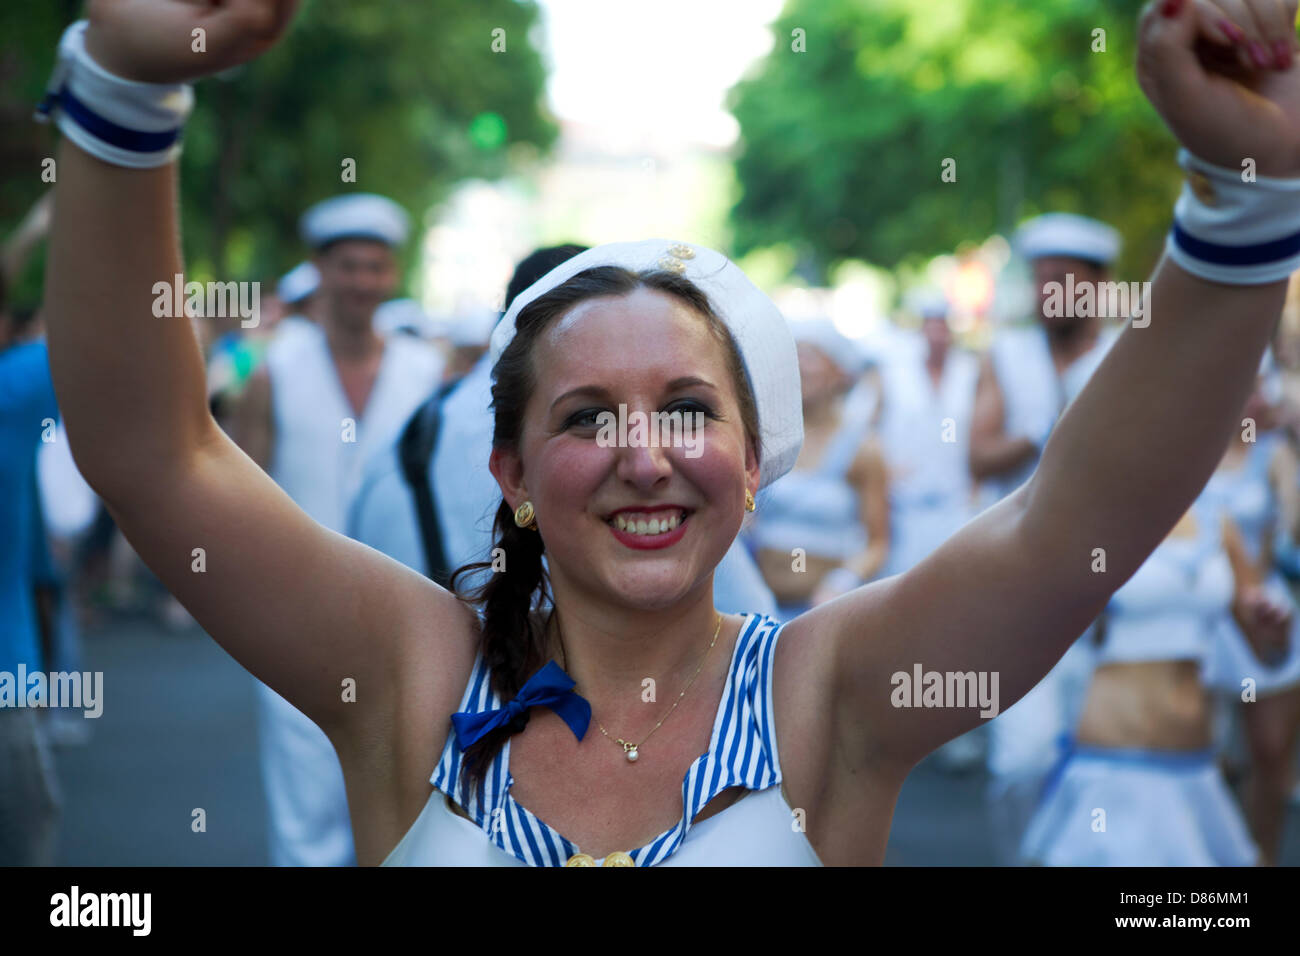 Berlin, Germany. 19th May 2013. Karneval der Kulturen - Annual Carnival and street party in Germany's Capital Berlin. Credit:  Rey T. Byhre / Alamy Live News Stock Photo